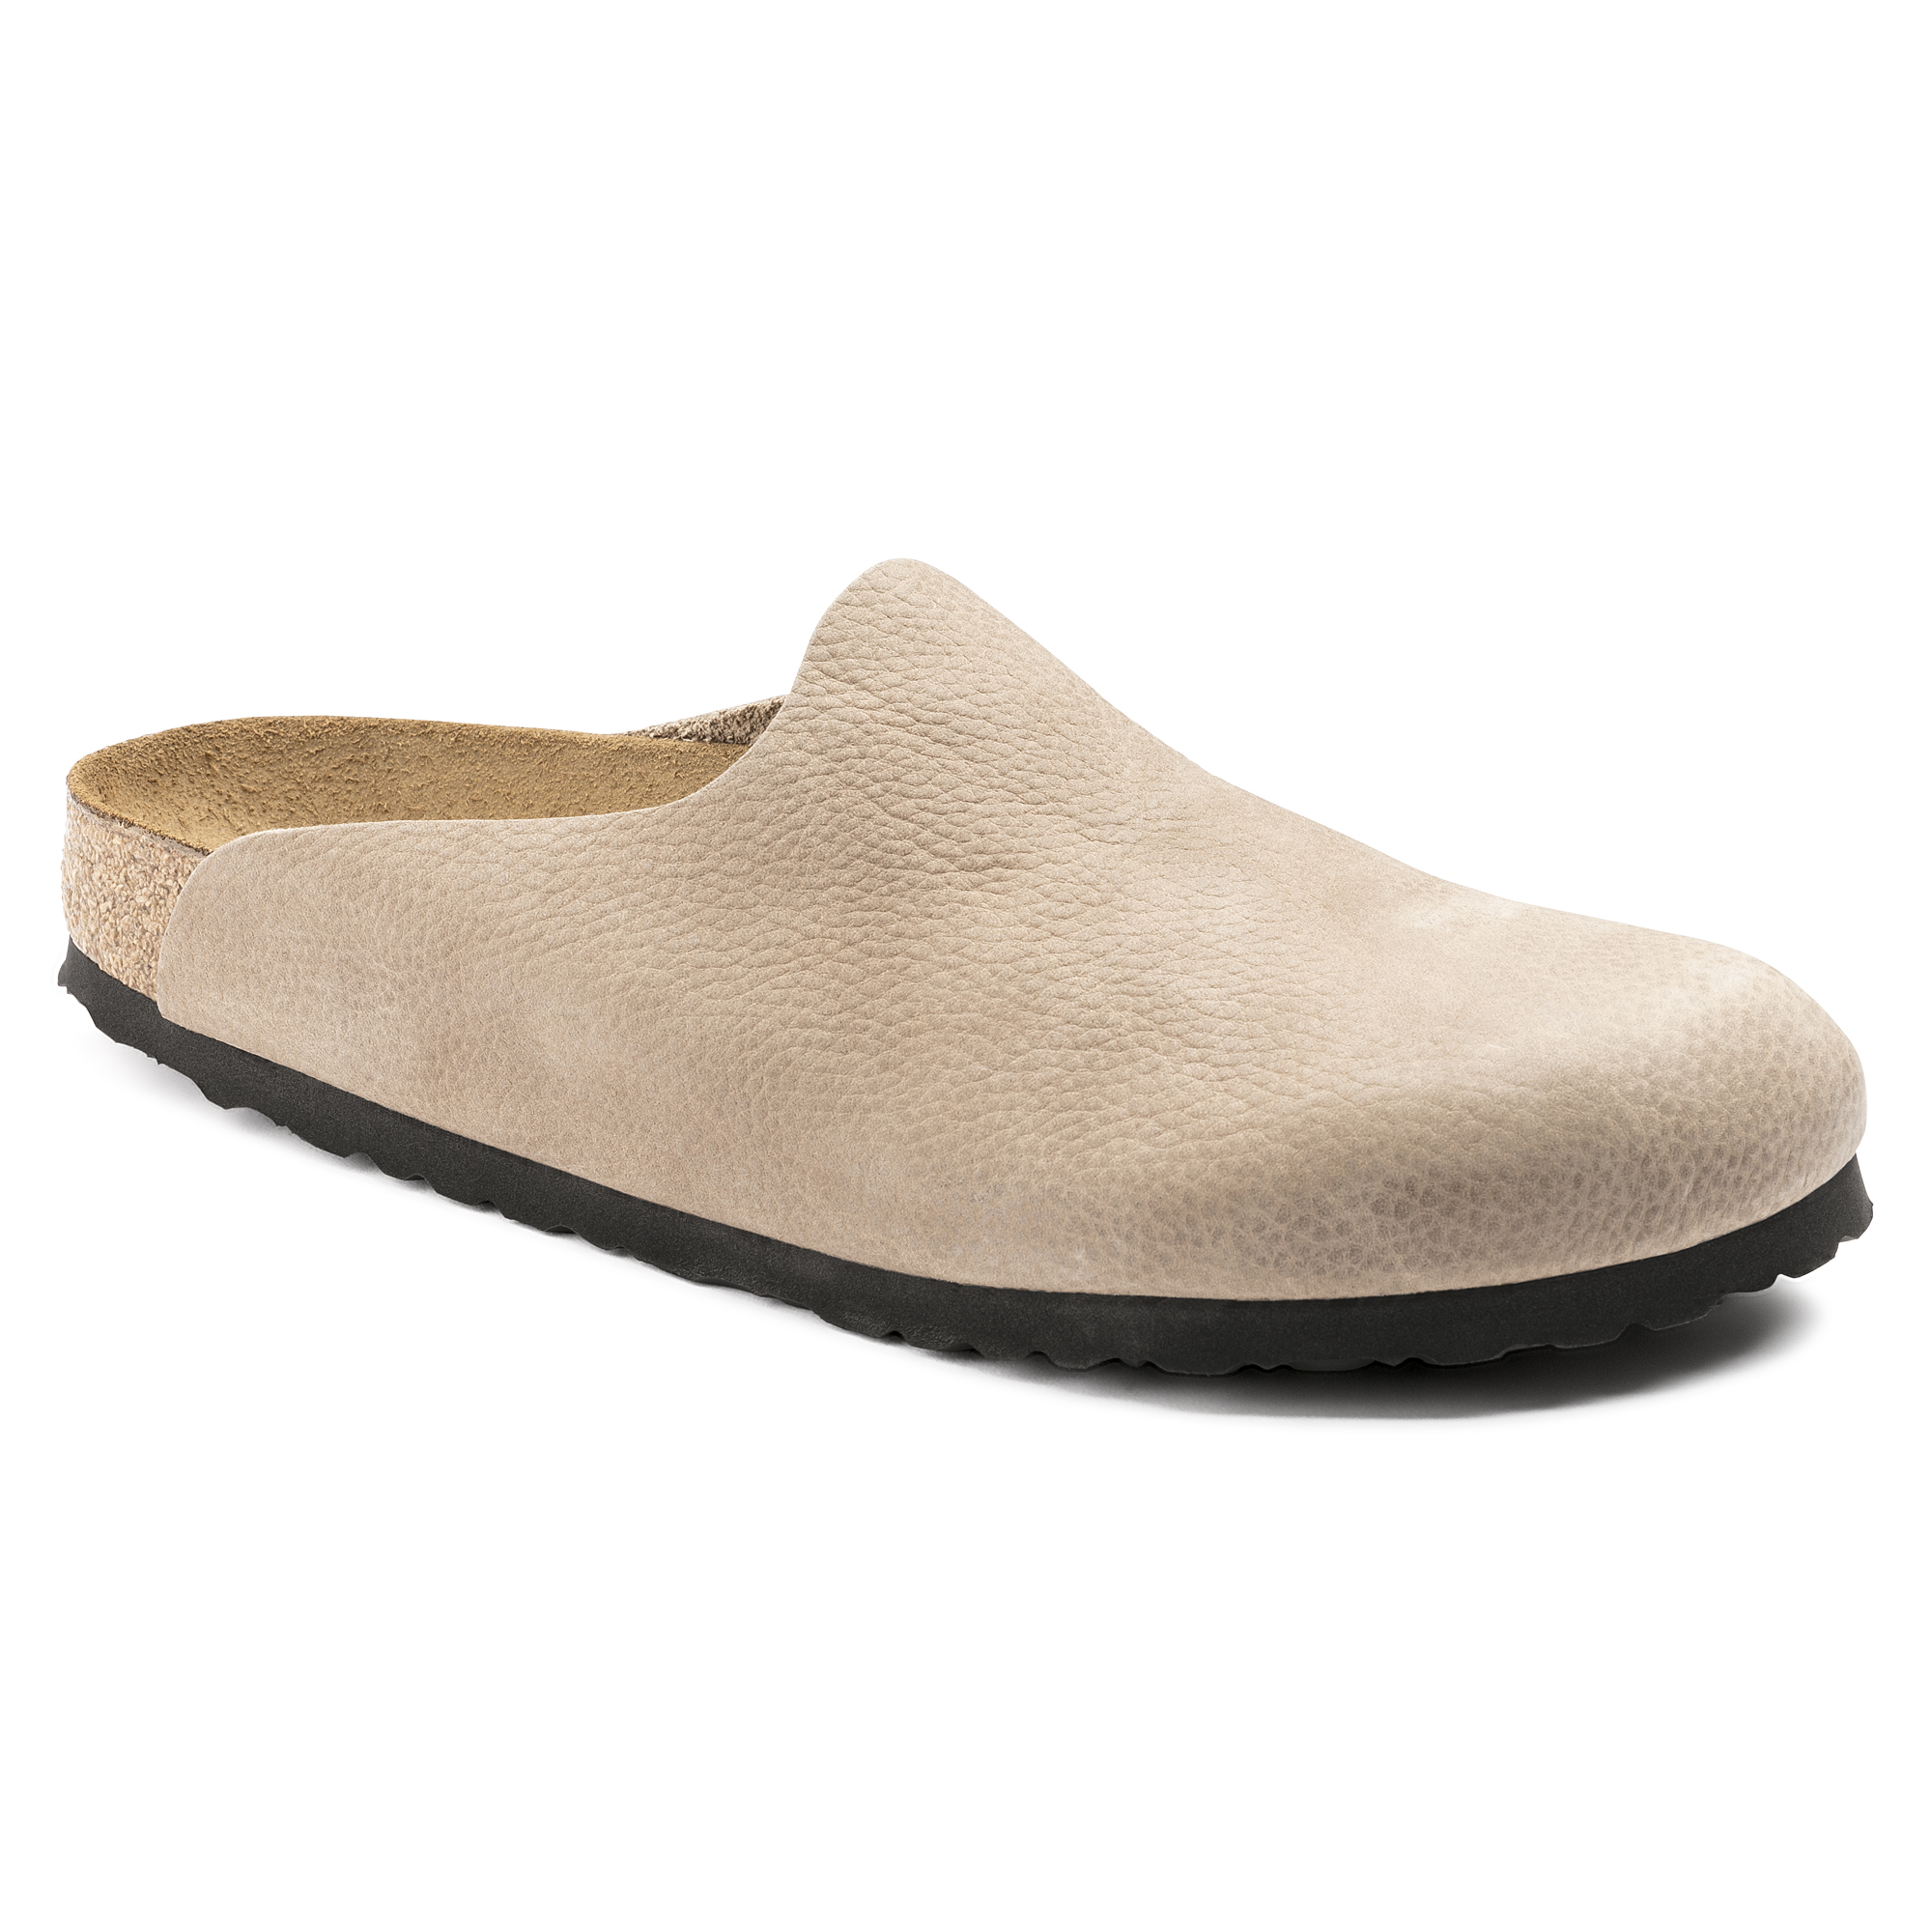 women's bedroom slippers with arch support